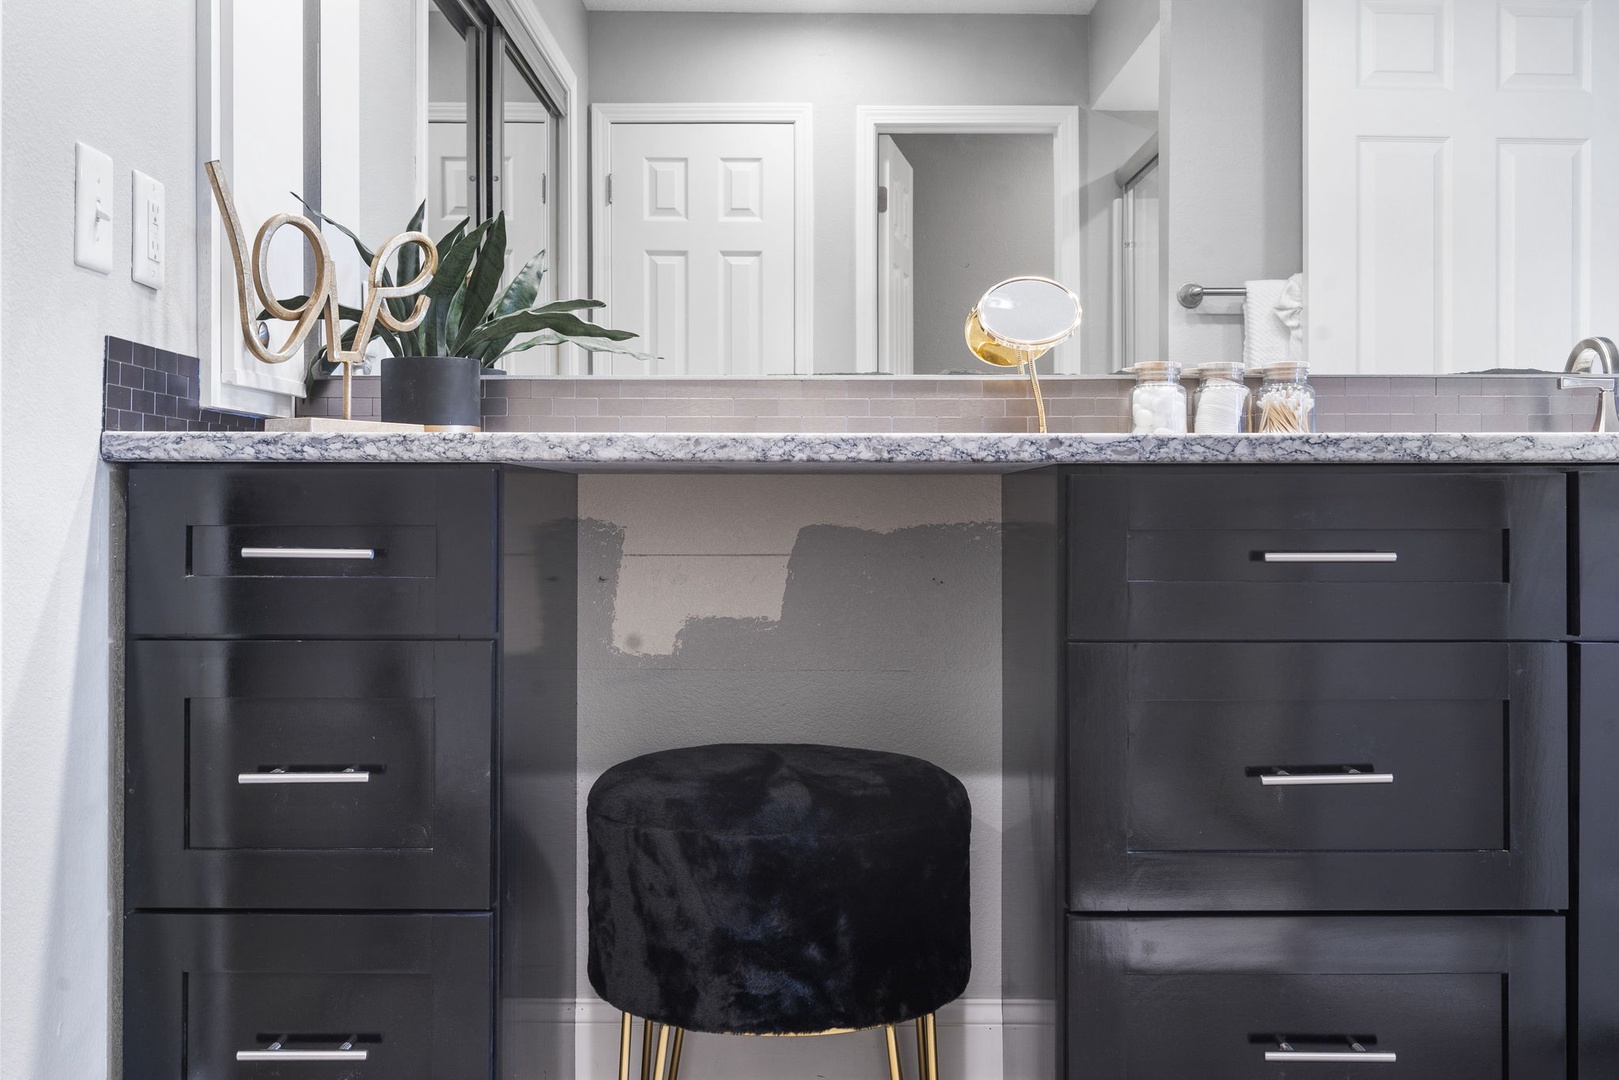 The second ensuite includes an oversized vanity & walk-in shower